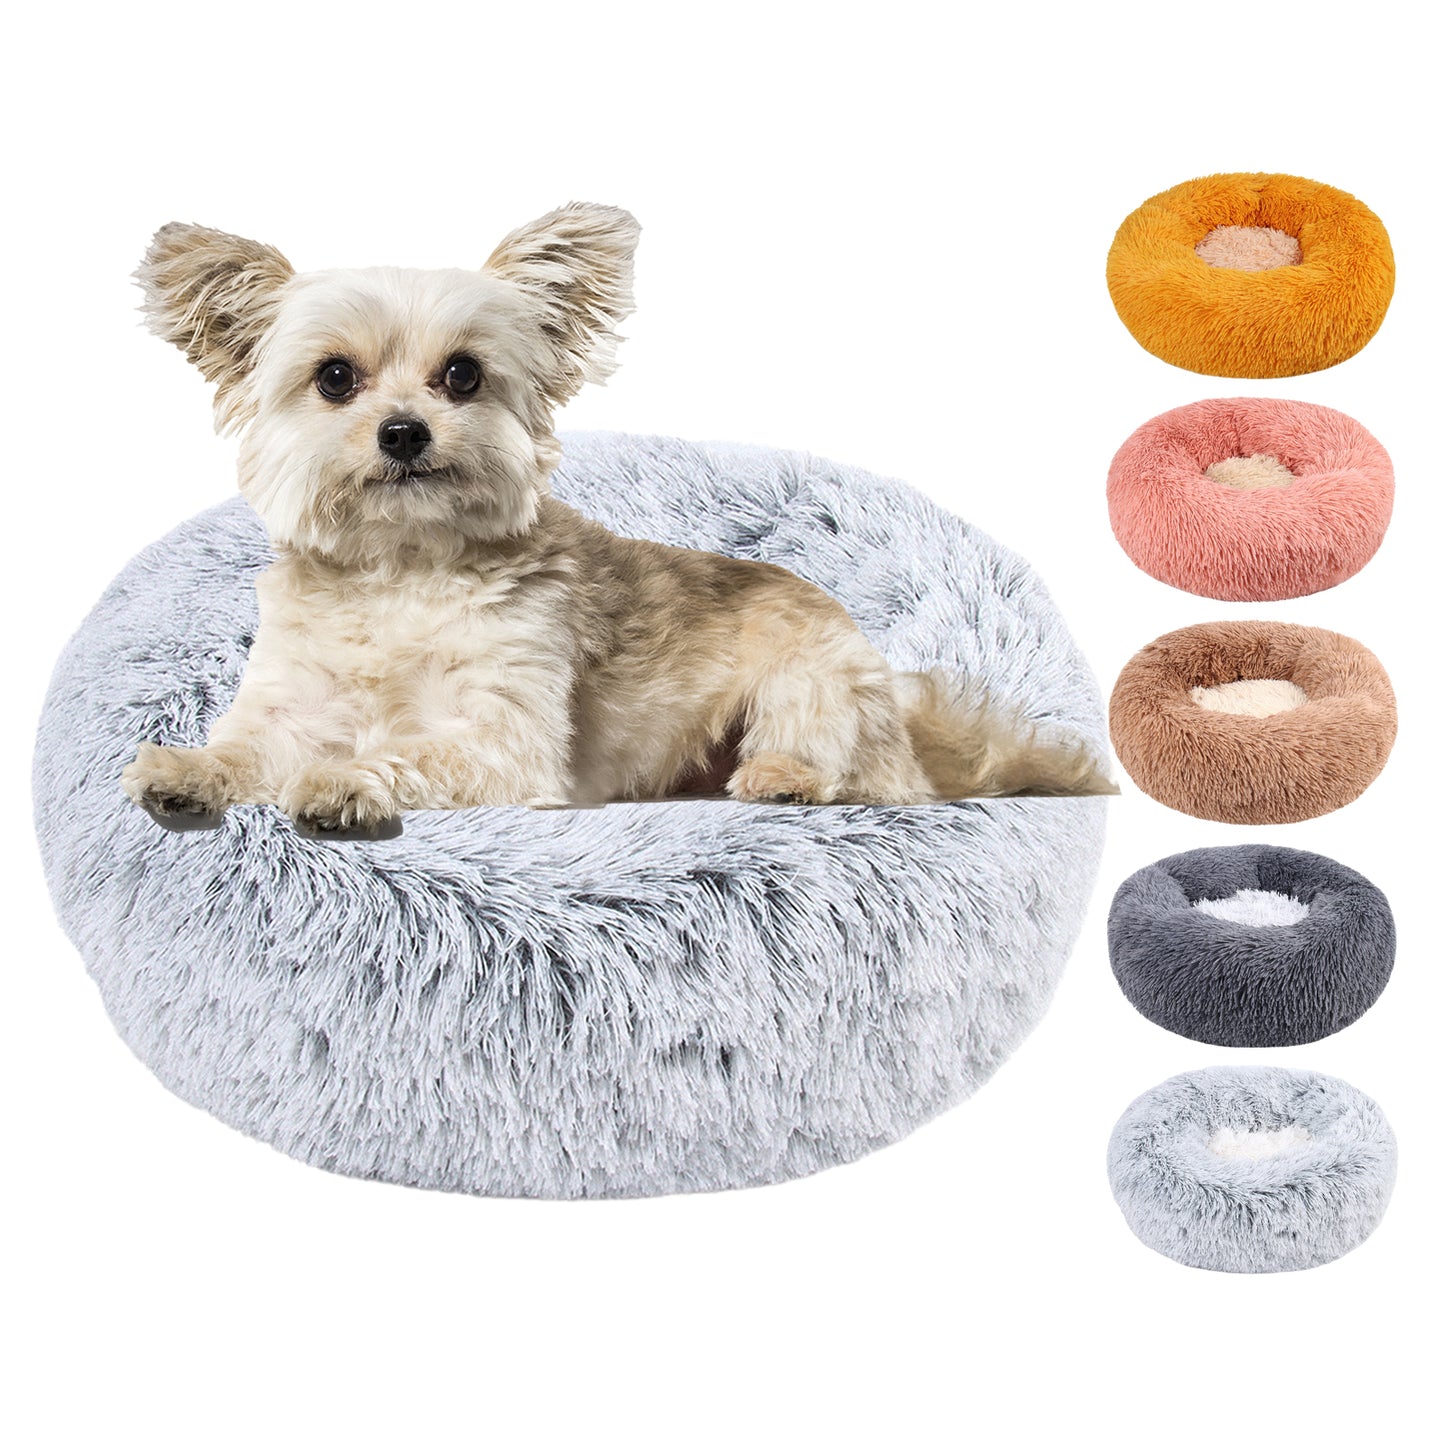 AIITLE high-quality dog or cat bed, furry, harmless and soft plush | AIITLE